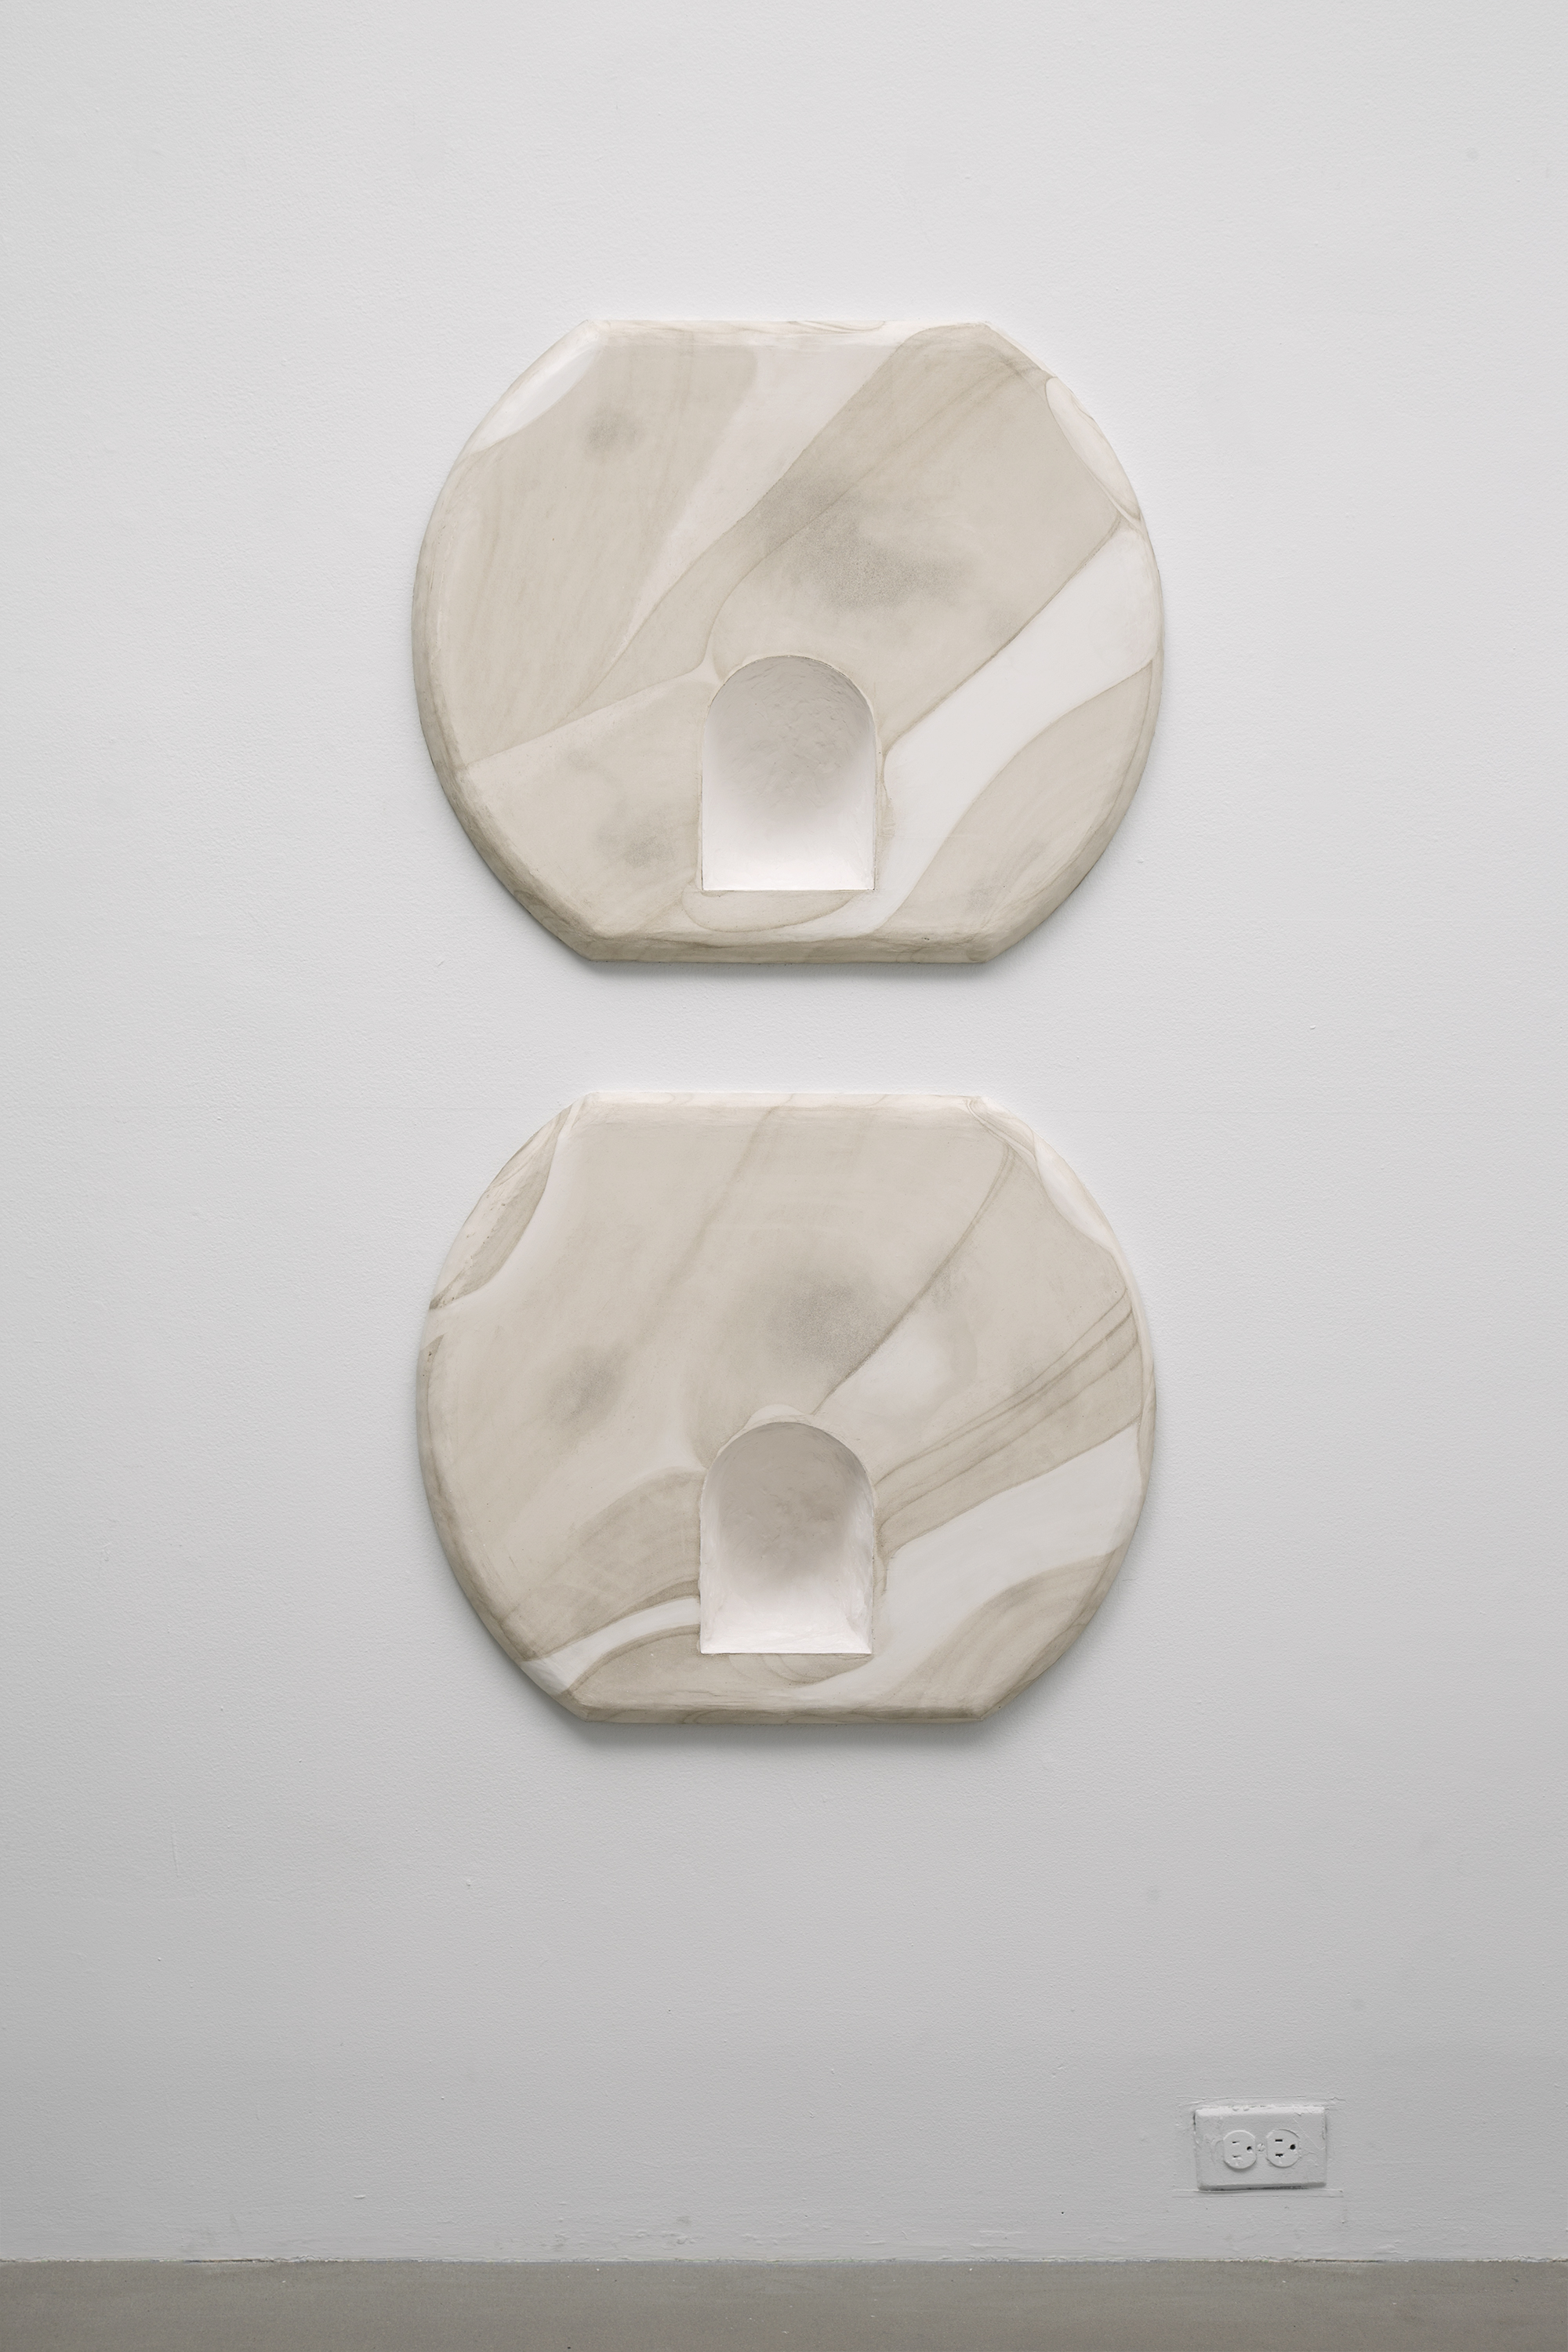 Gregory_Carideo-04_GROUNDING_HOLES_2015_PLASTER_AND_CLAY_SEDIMENT